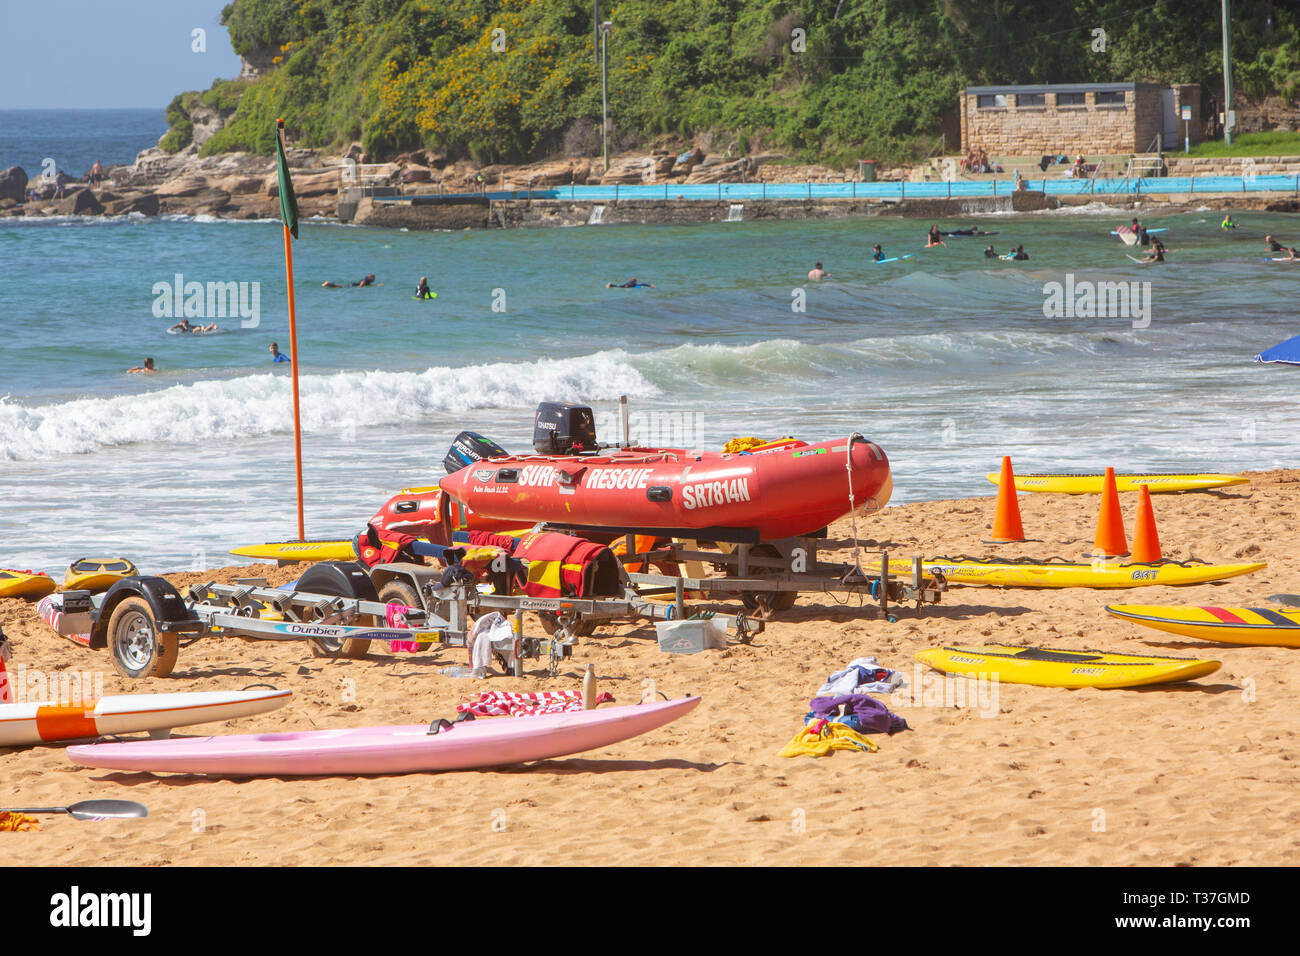 Palm Beach Sydney, Surf rescue equipment and dinghy boat on Palm beach in Sydney,Australia Stock Photo